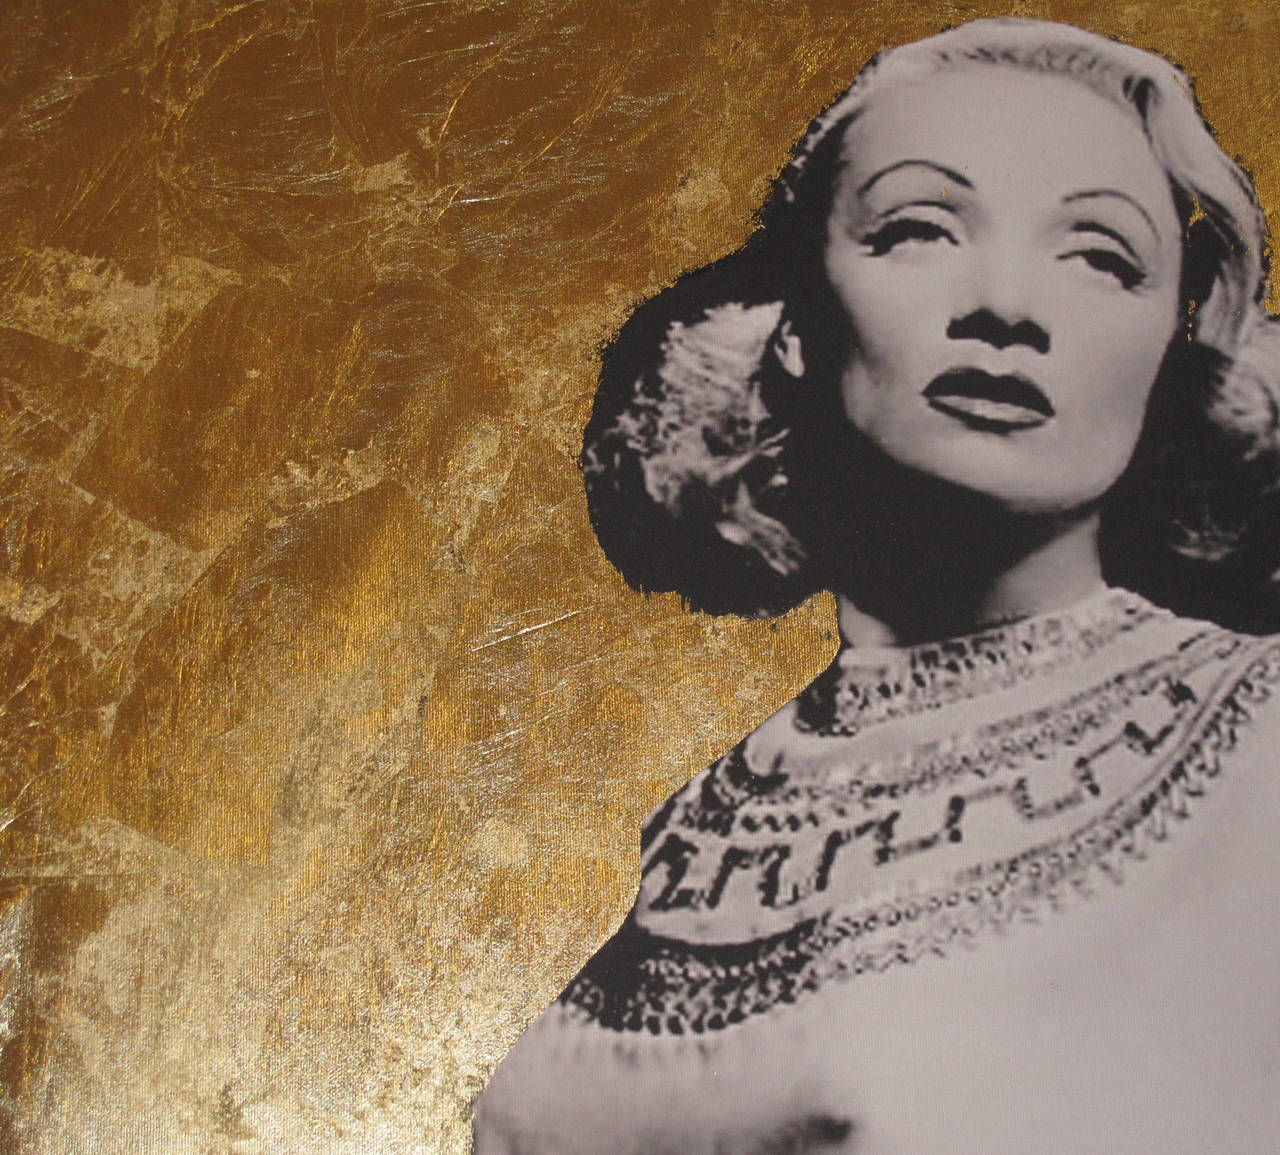 Mixed-media artwork of Marlene Dietrich. The background gold-leafed, the image of Dietrich is a photo shopped image supplemented with paint. Signed lower left hand Frederico de Albinini.